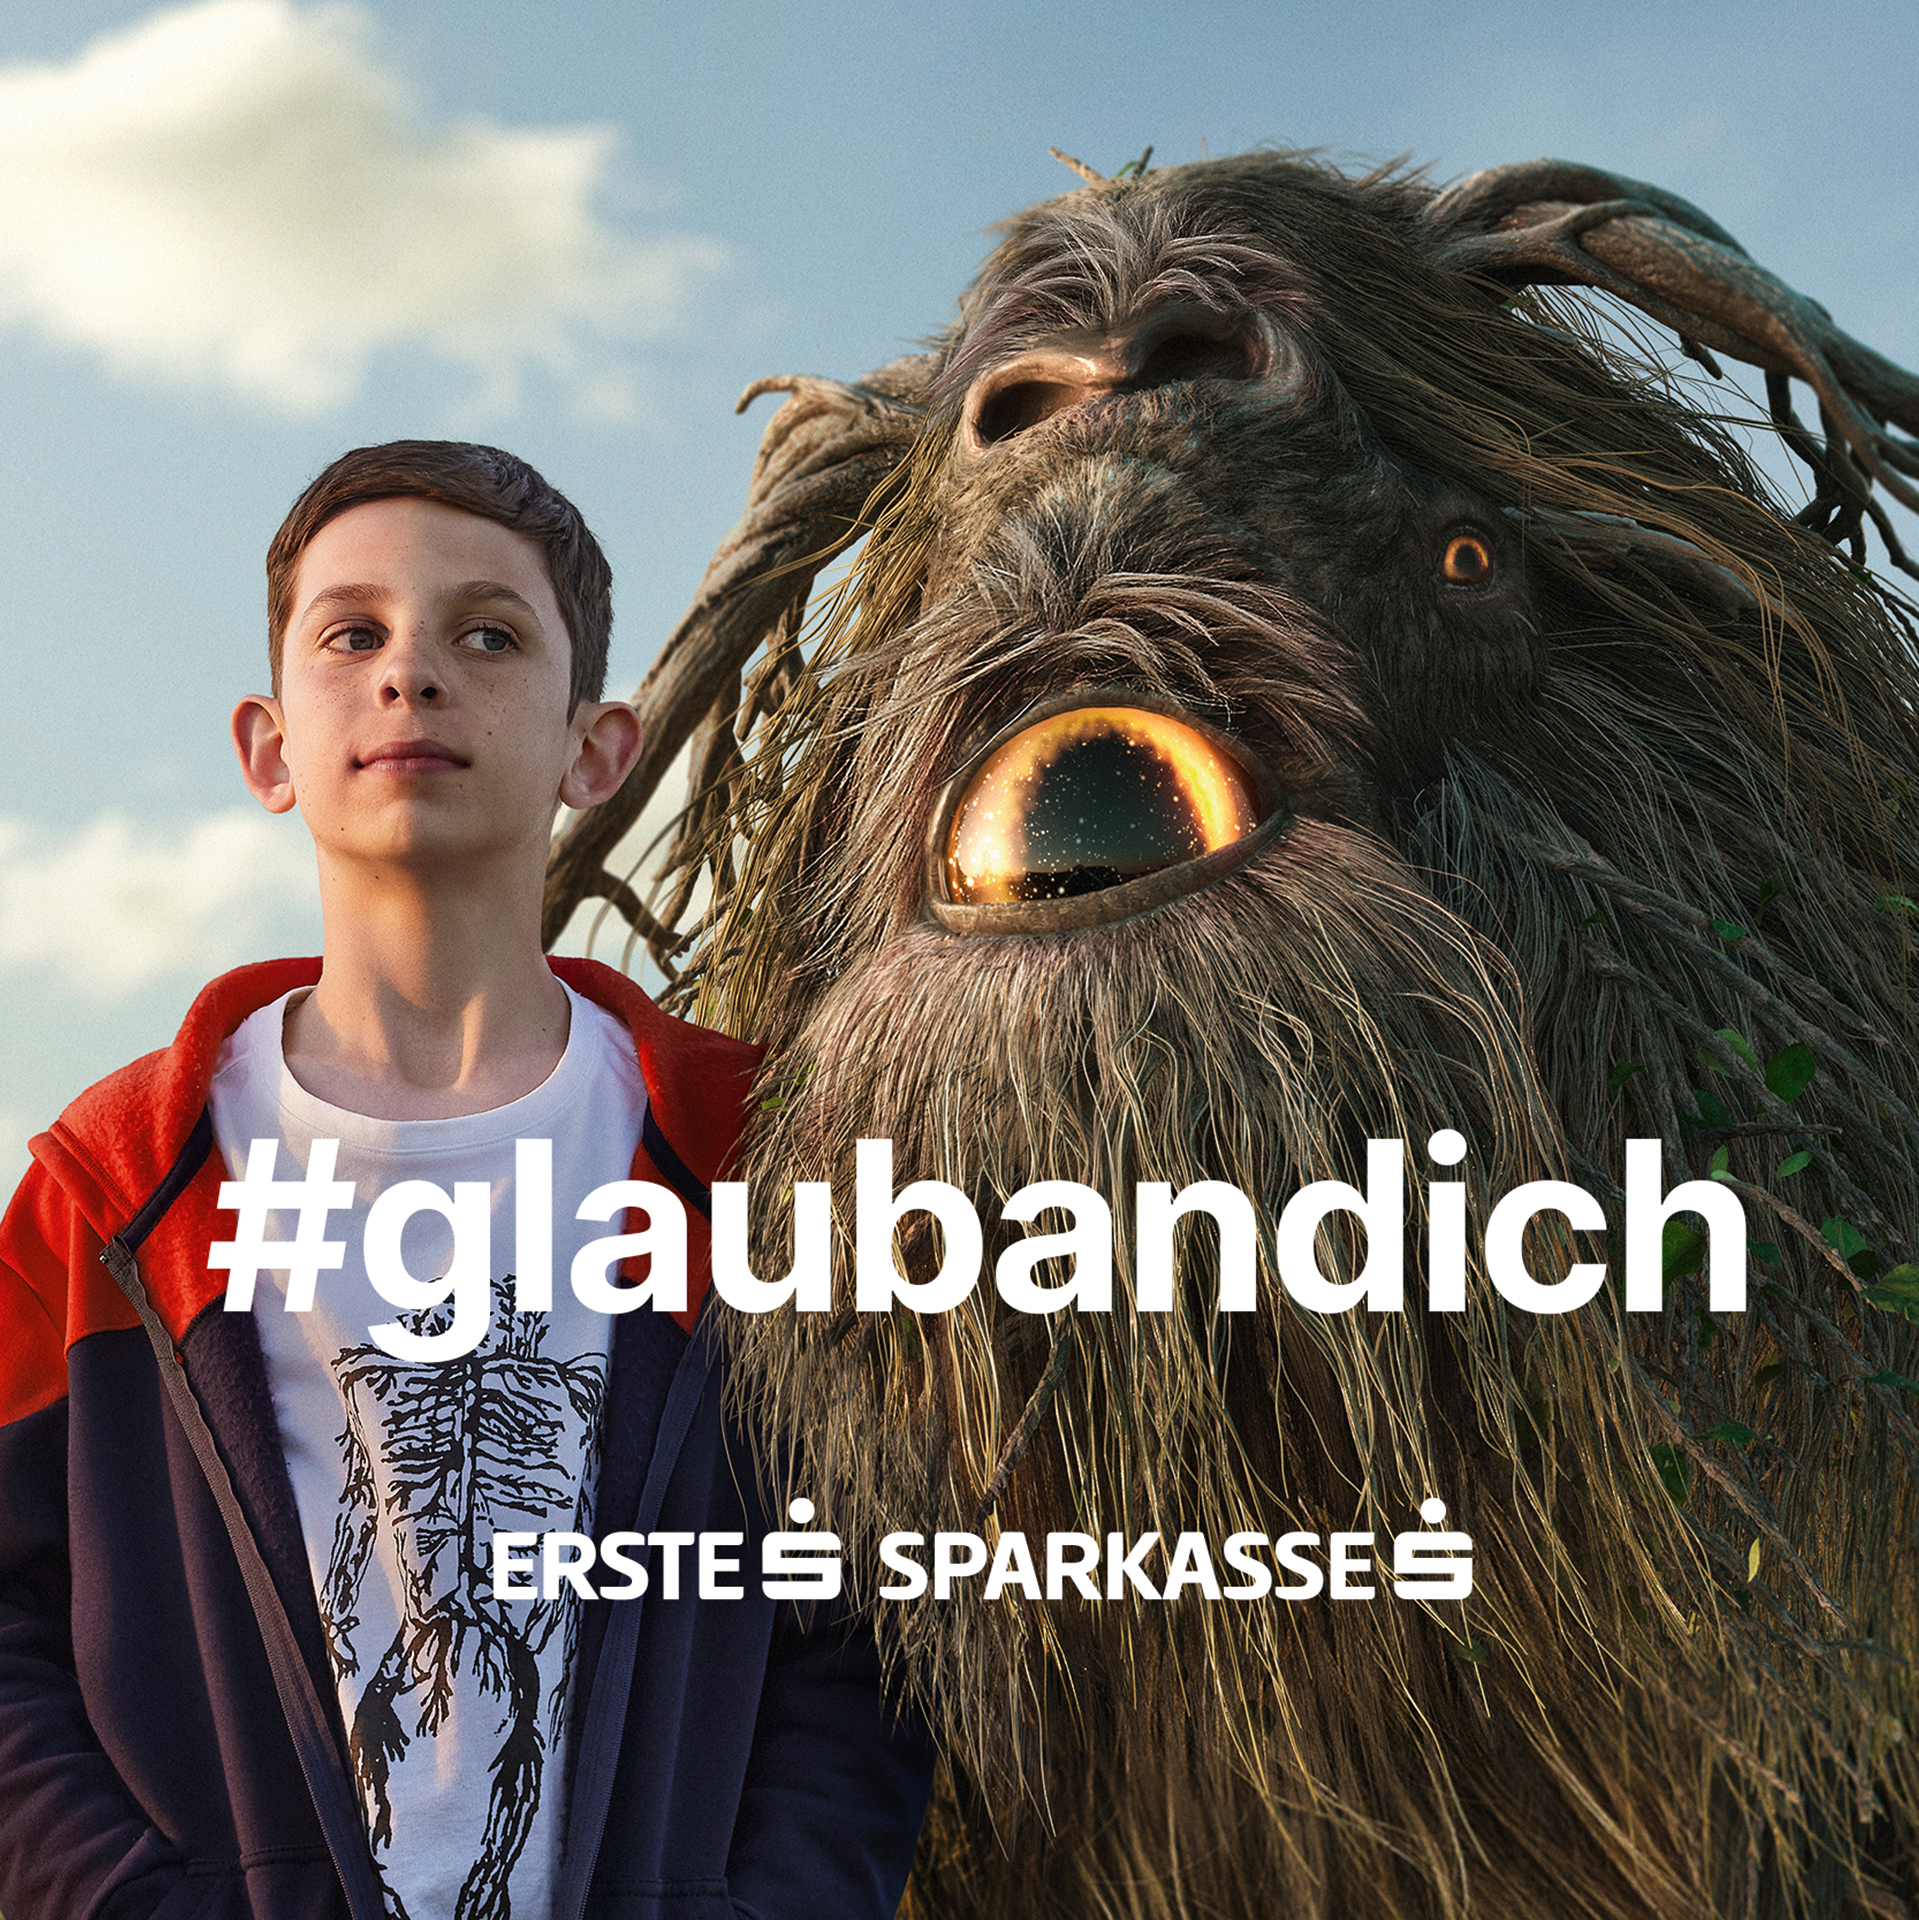 Image of a boy in sweatshirt jacket next to a fictional creature from the successful campaign #glaubandich by Jung von Matt DONAU for Sparkasse. 